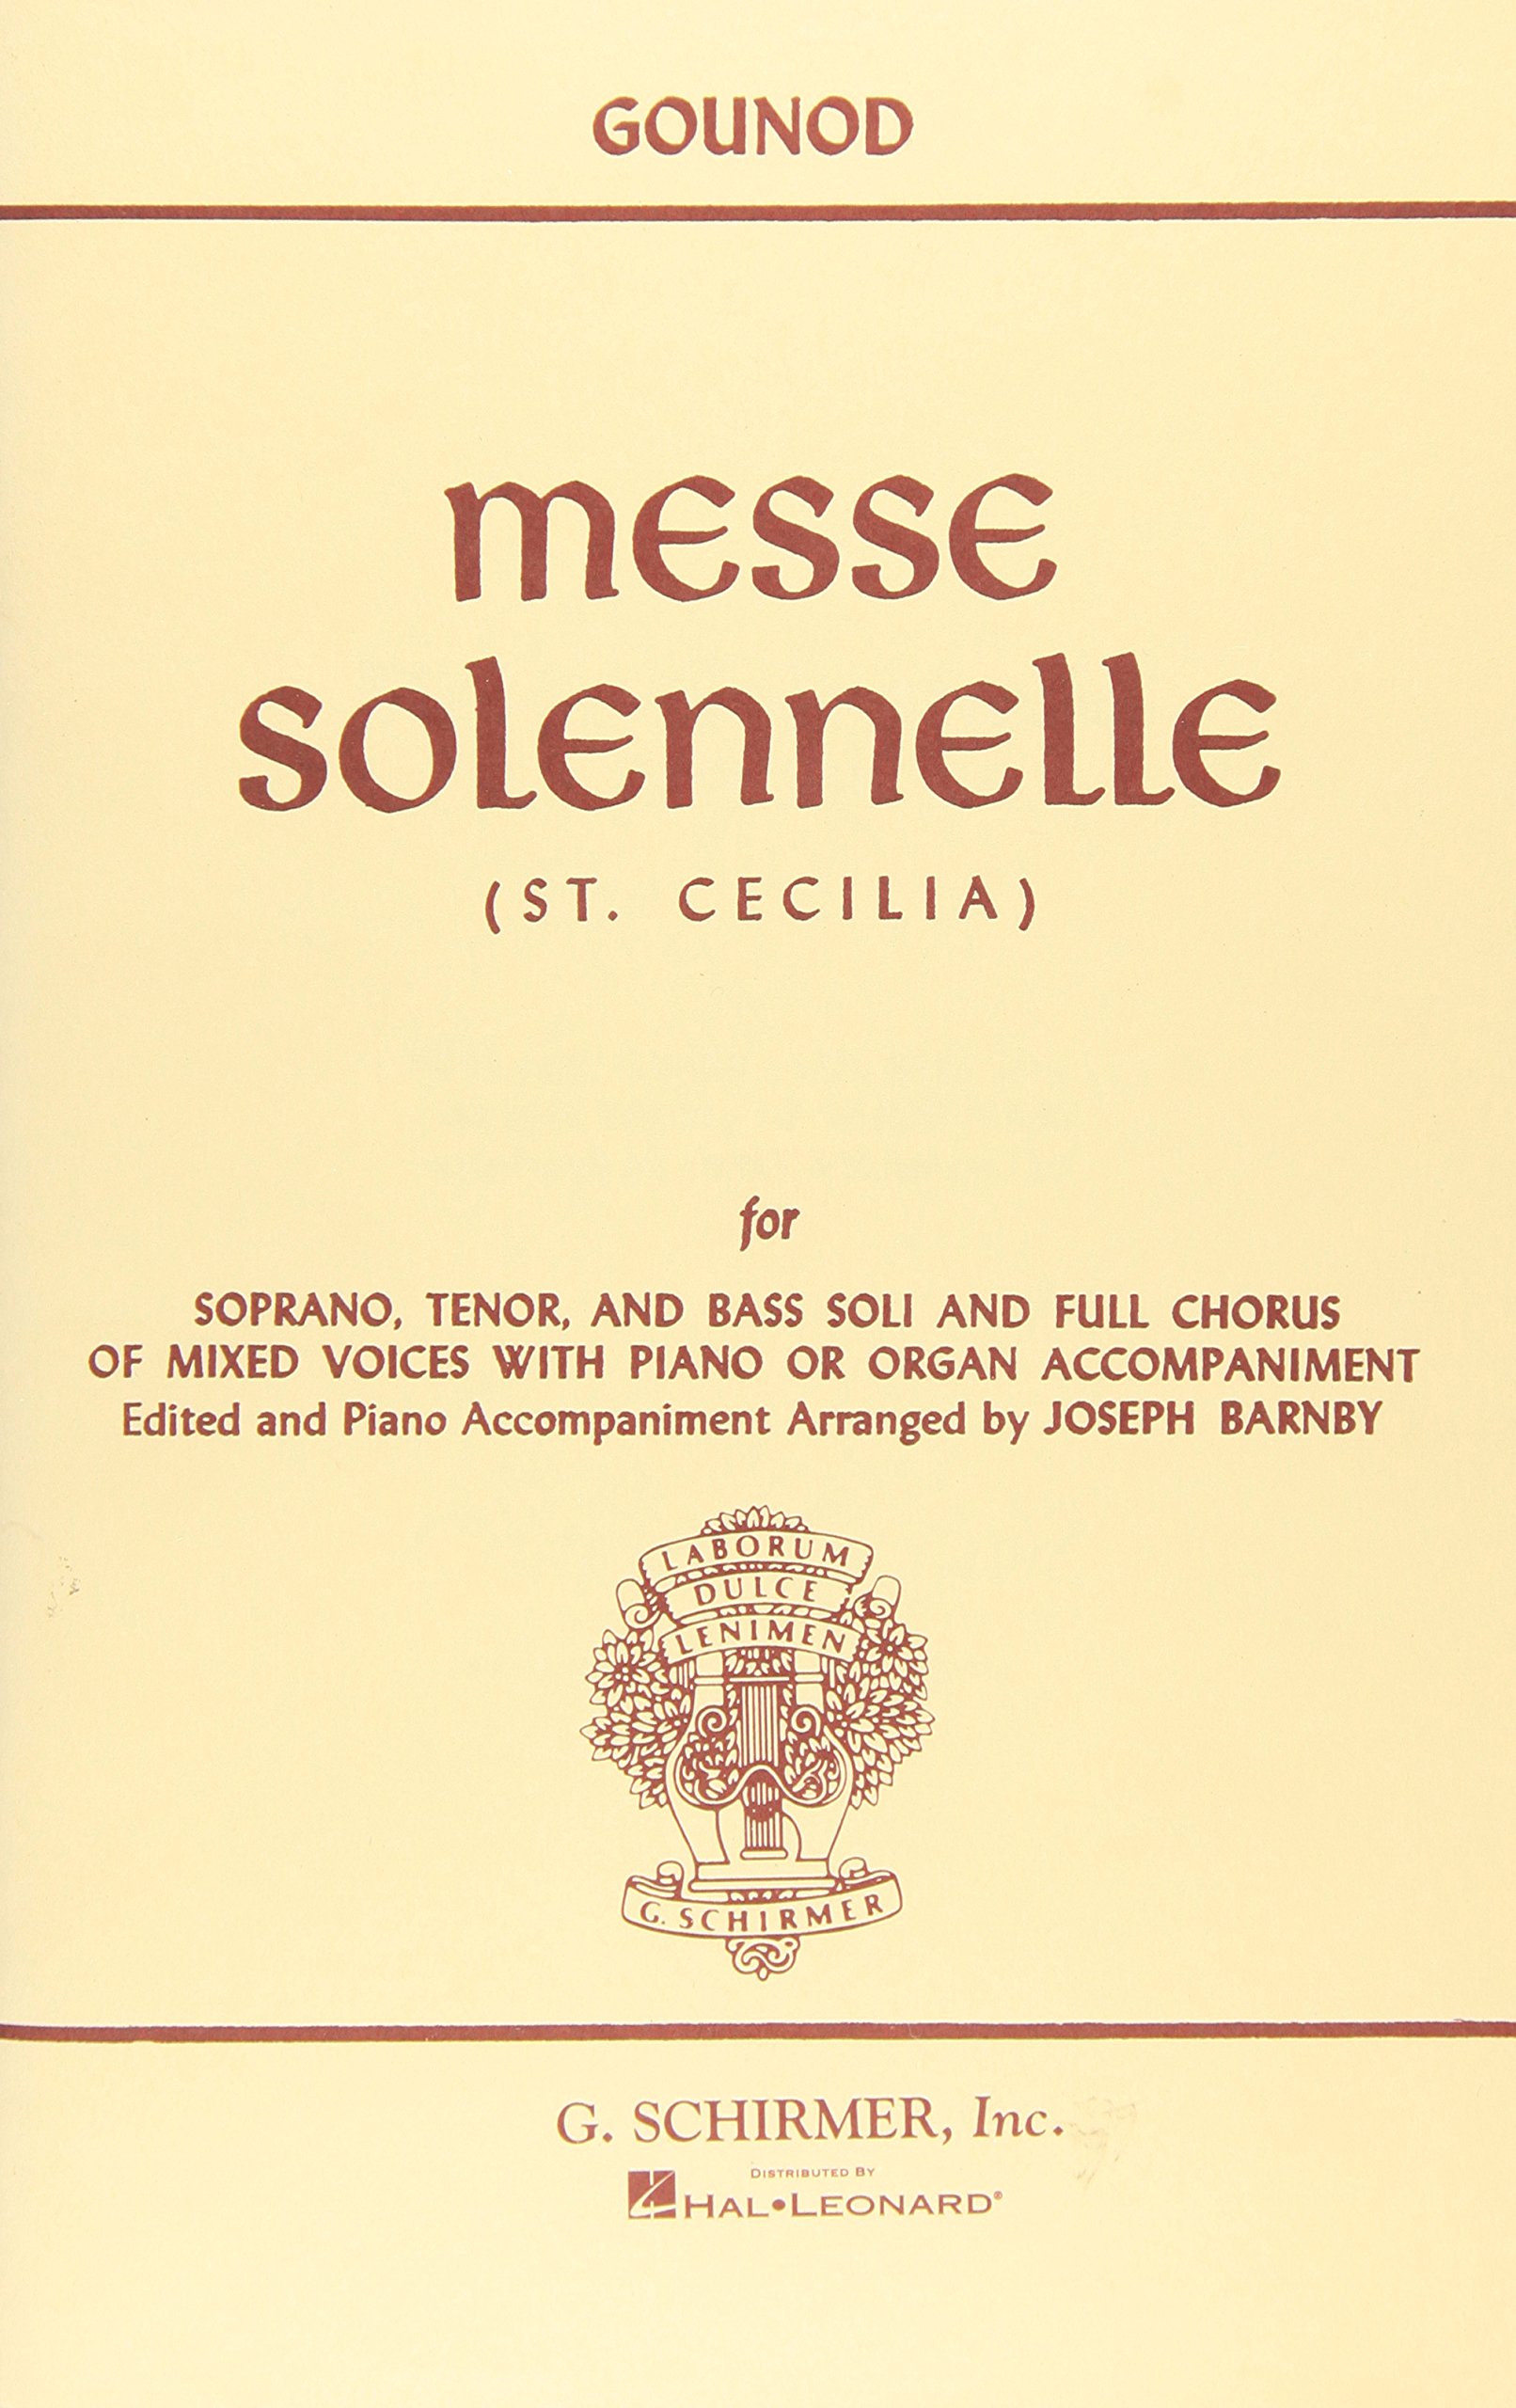 Messe Solennelle (St. Cecilia) (GOUNOD CHARLES)